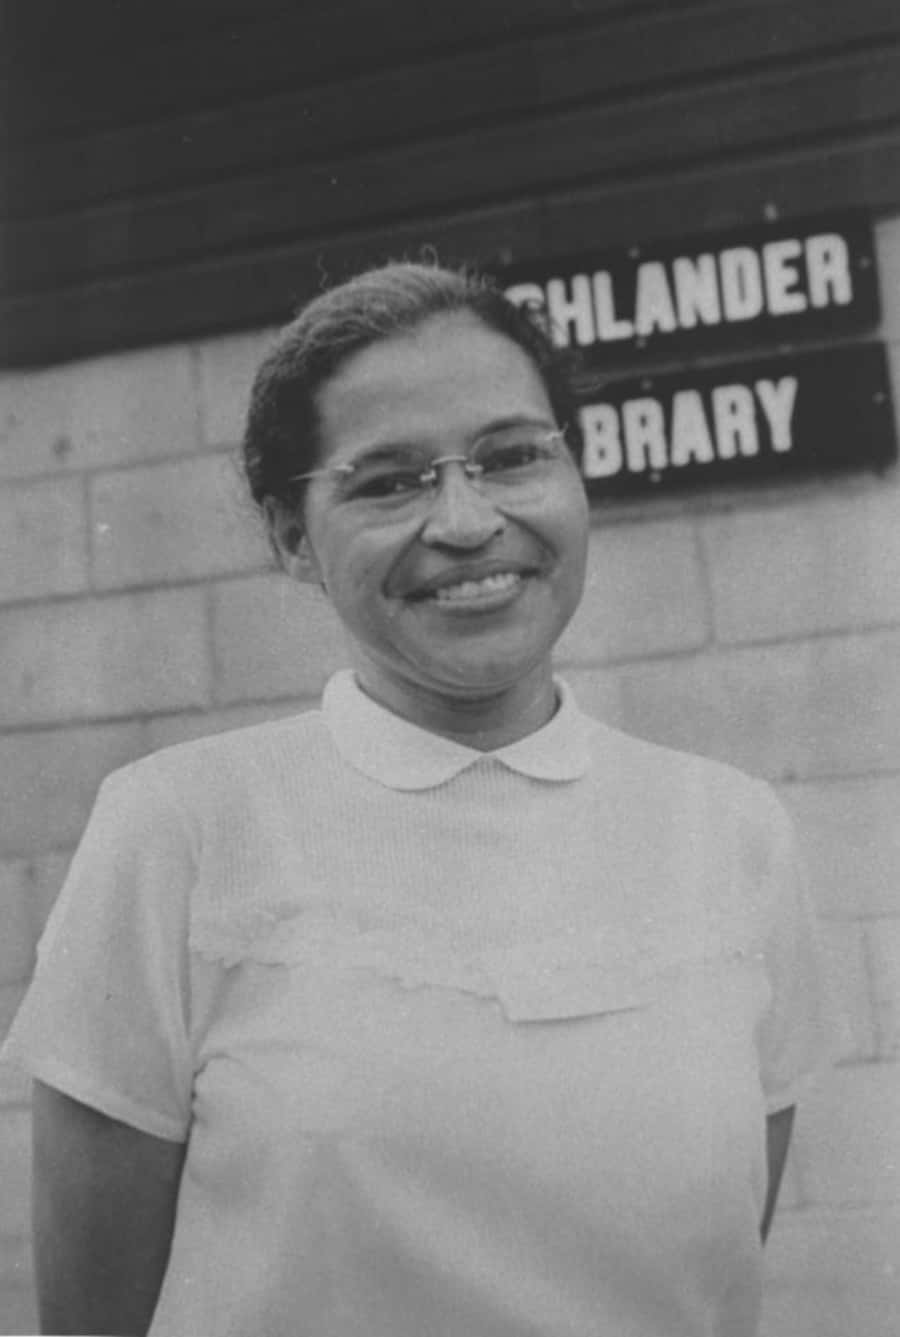 A Woman In A White Shirt Standing In Front Of A Library